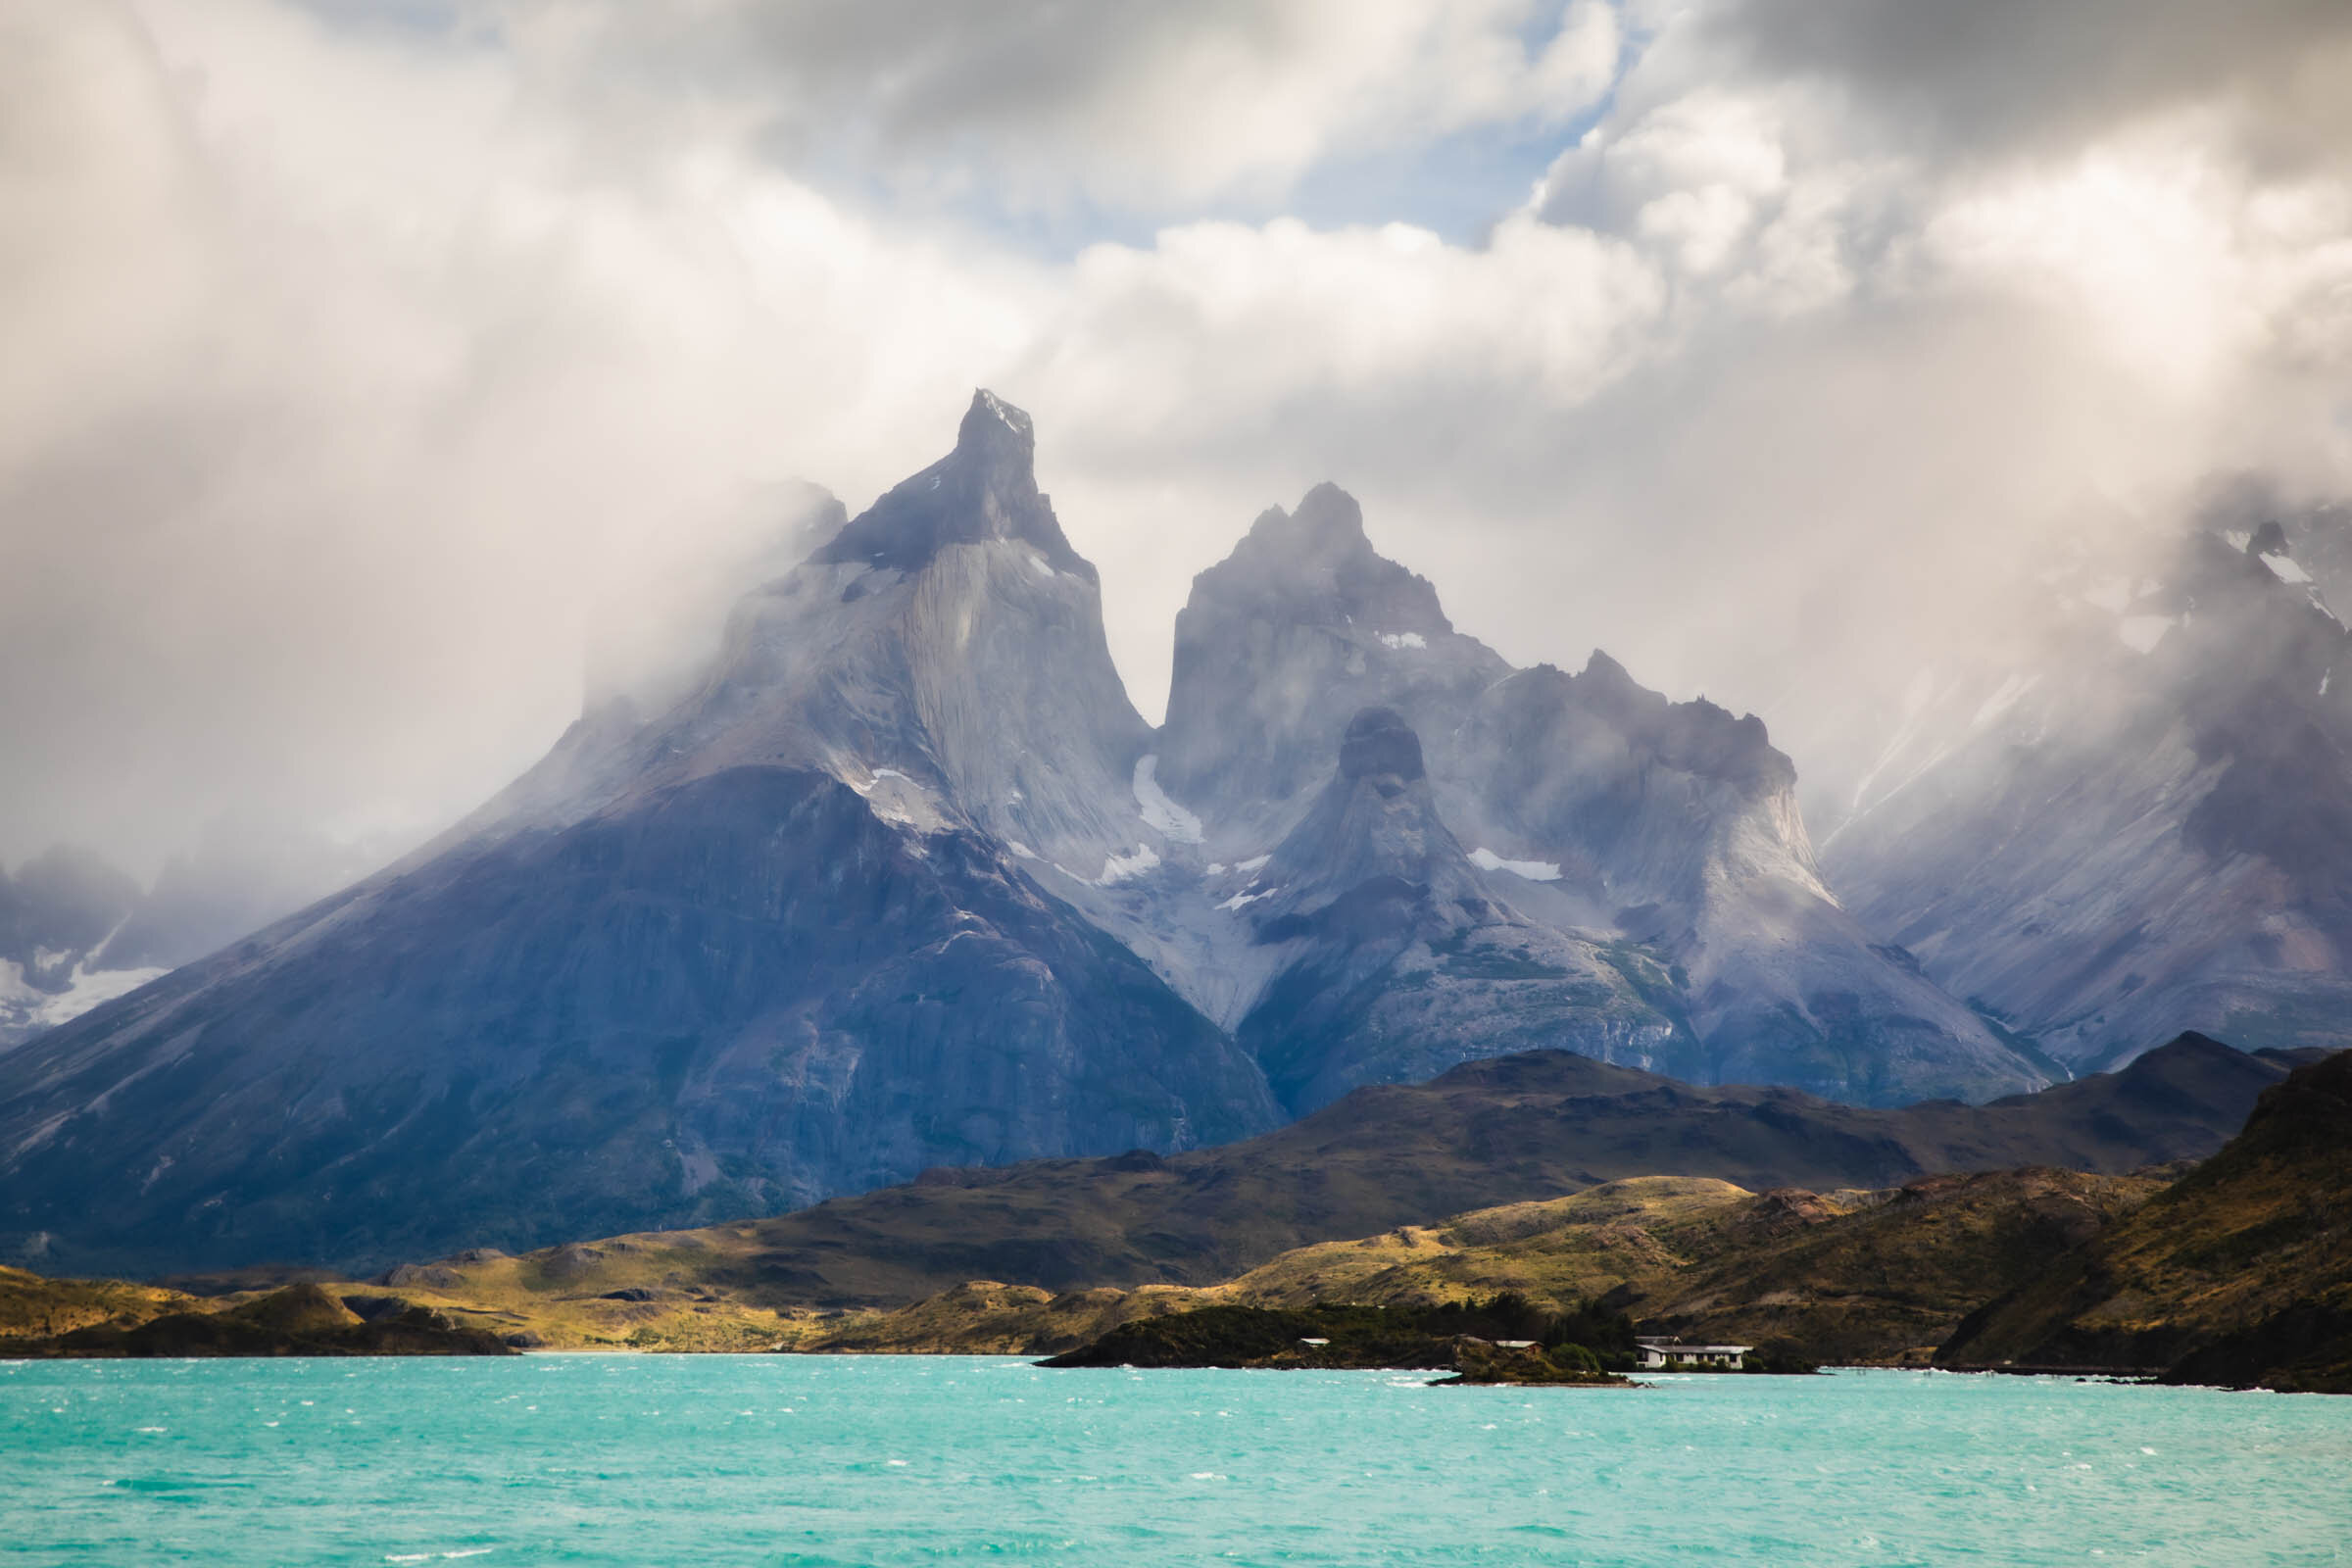  There was not a moment in Torres del Paine that I didn’t feel insignificant. Anything of human origin was small in comparison to its natural surroundings, but if you look carefully in the bottom right of this image you can see the small ‘Hosteria’ w